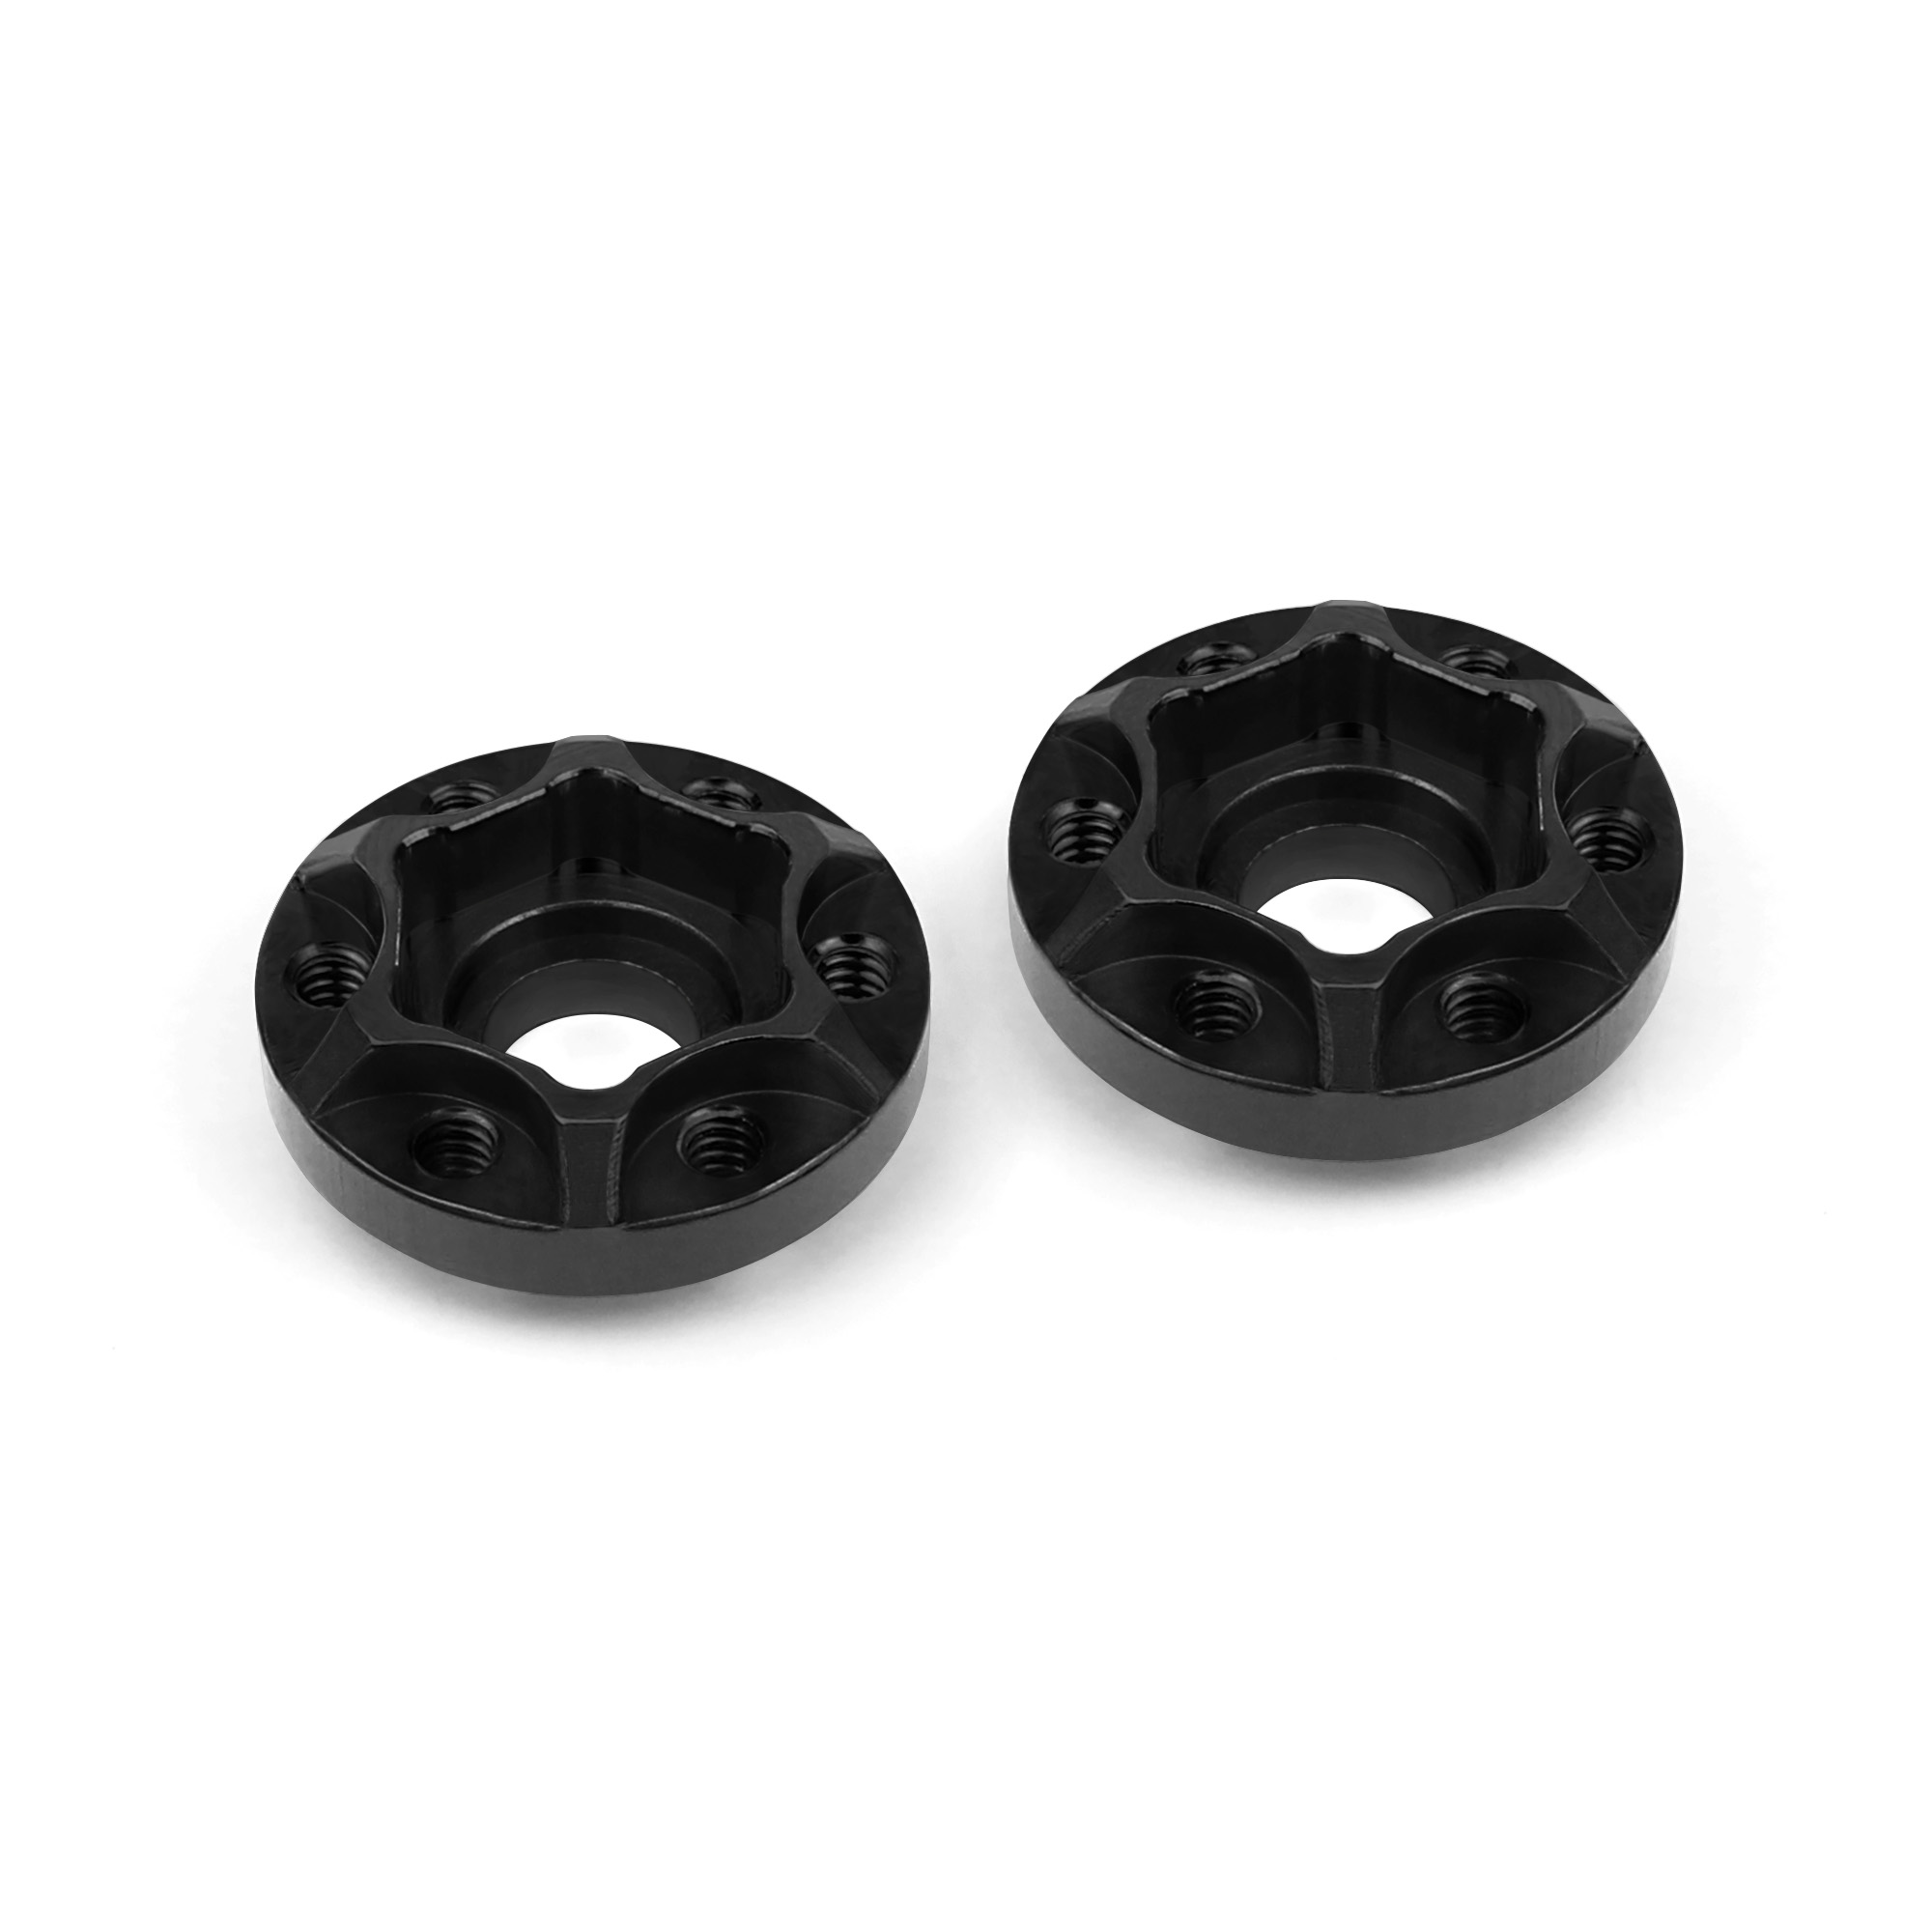 Vanquish Products SLW 225 Wheel Hub Black Anodized VPS07111 for sale online